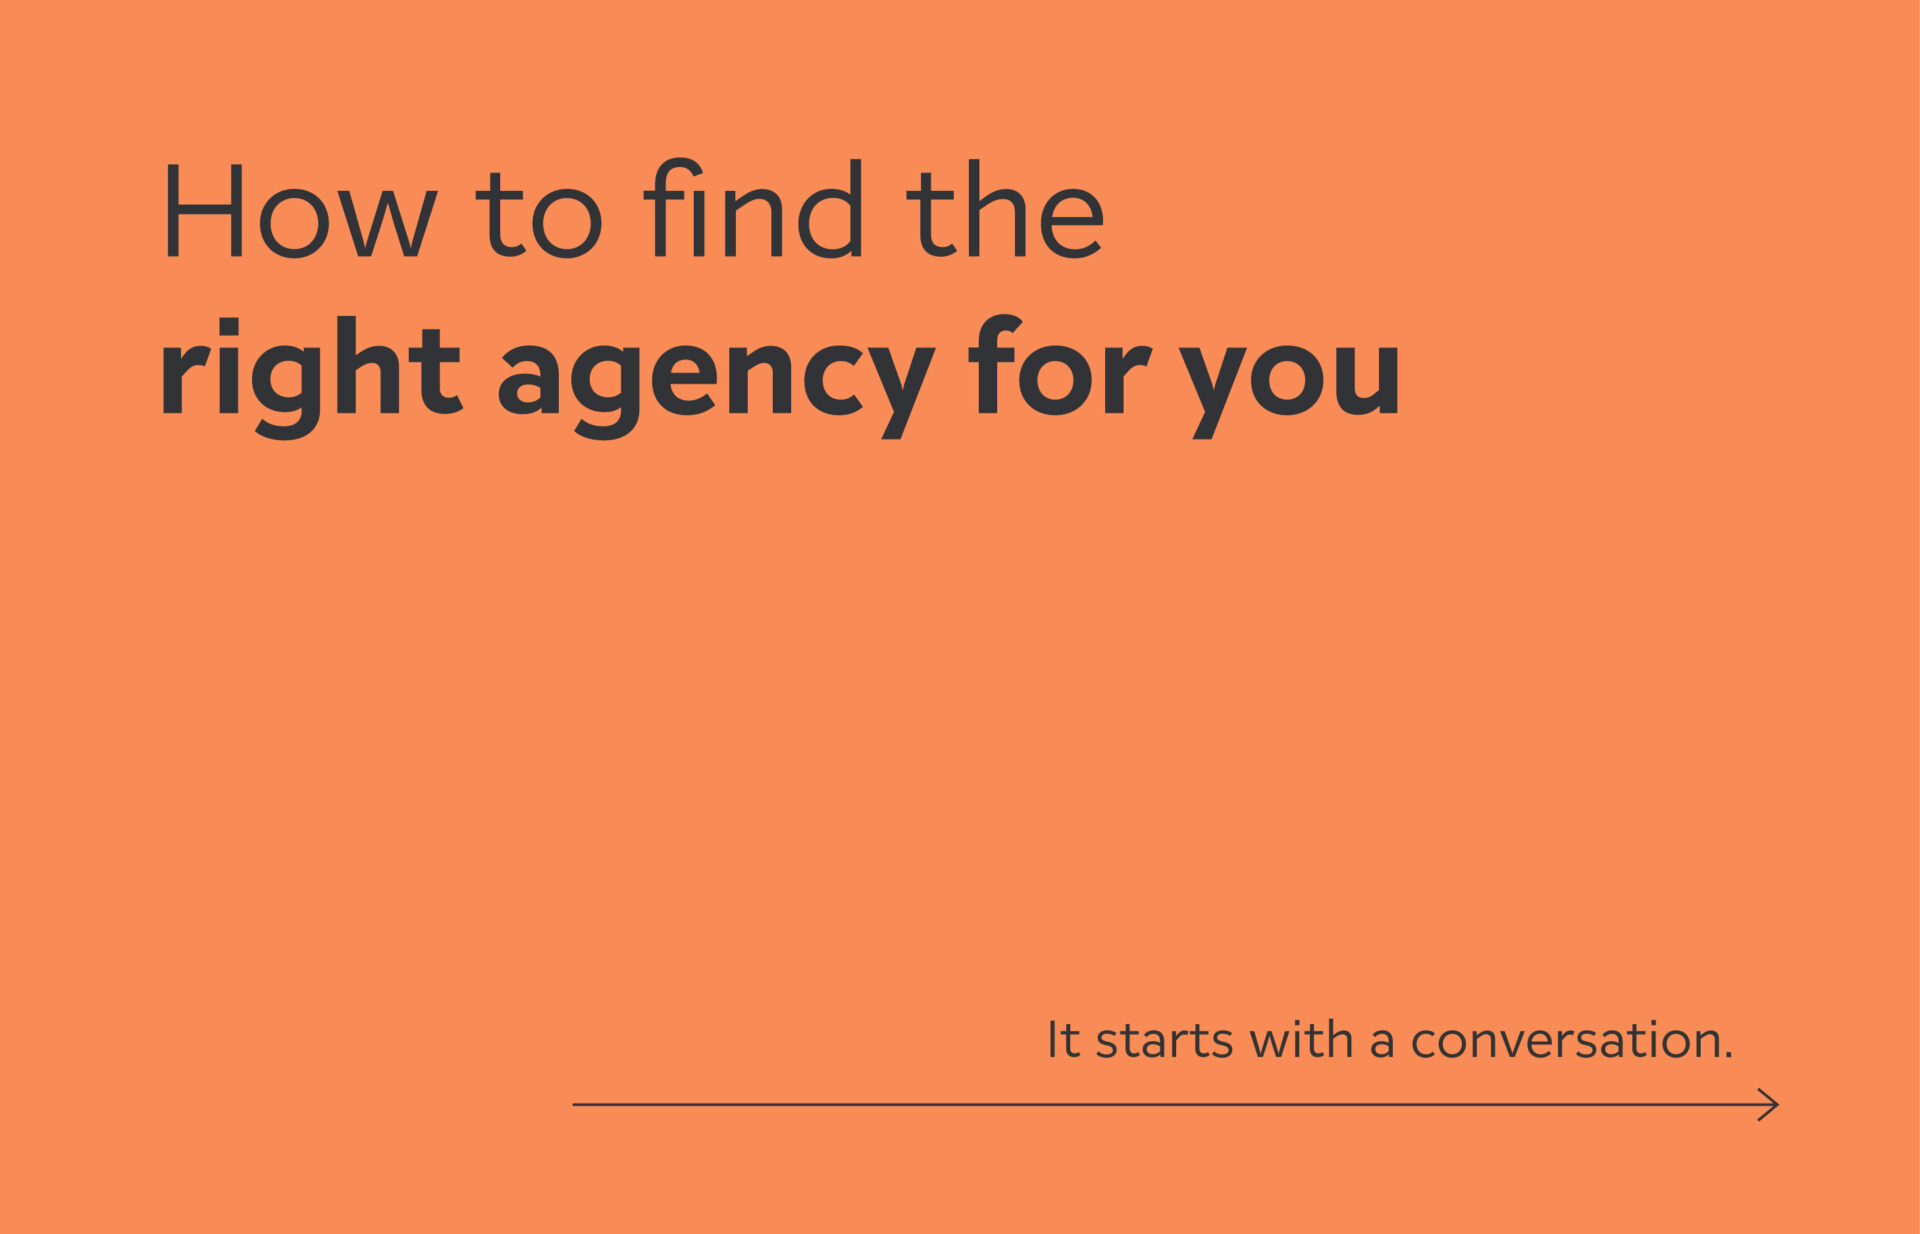 How to find the right agency for you